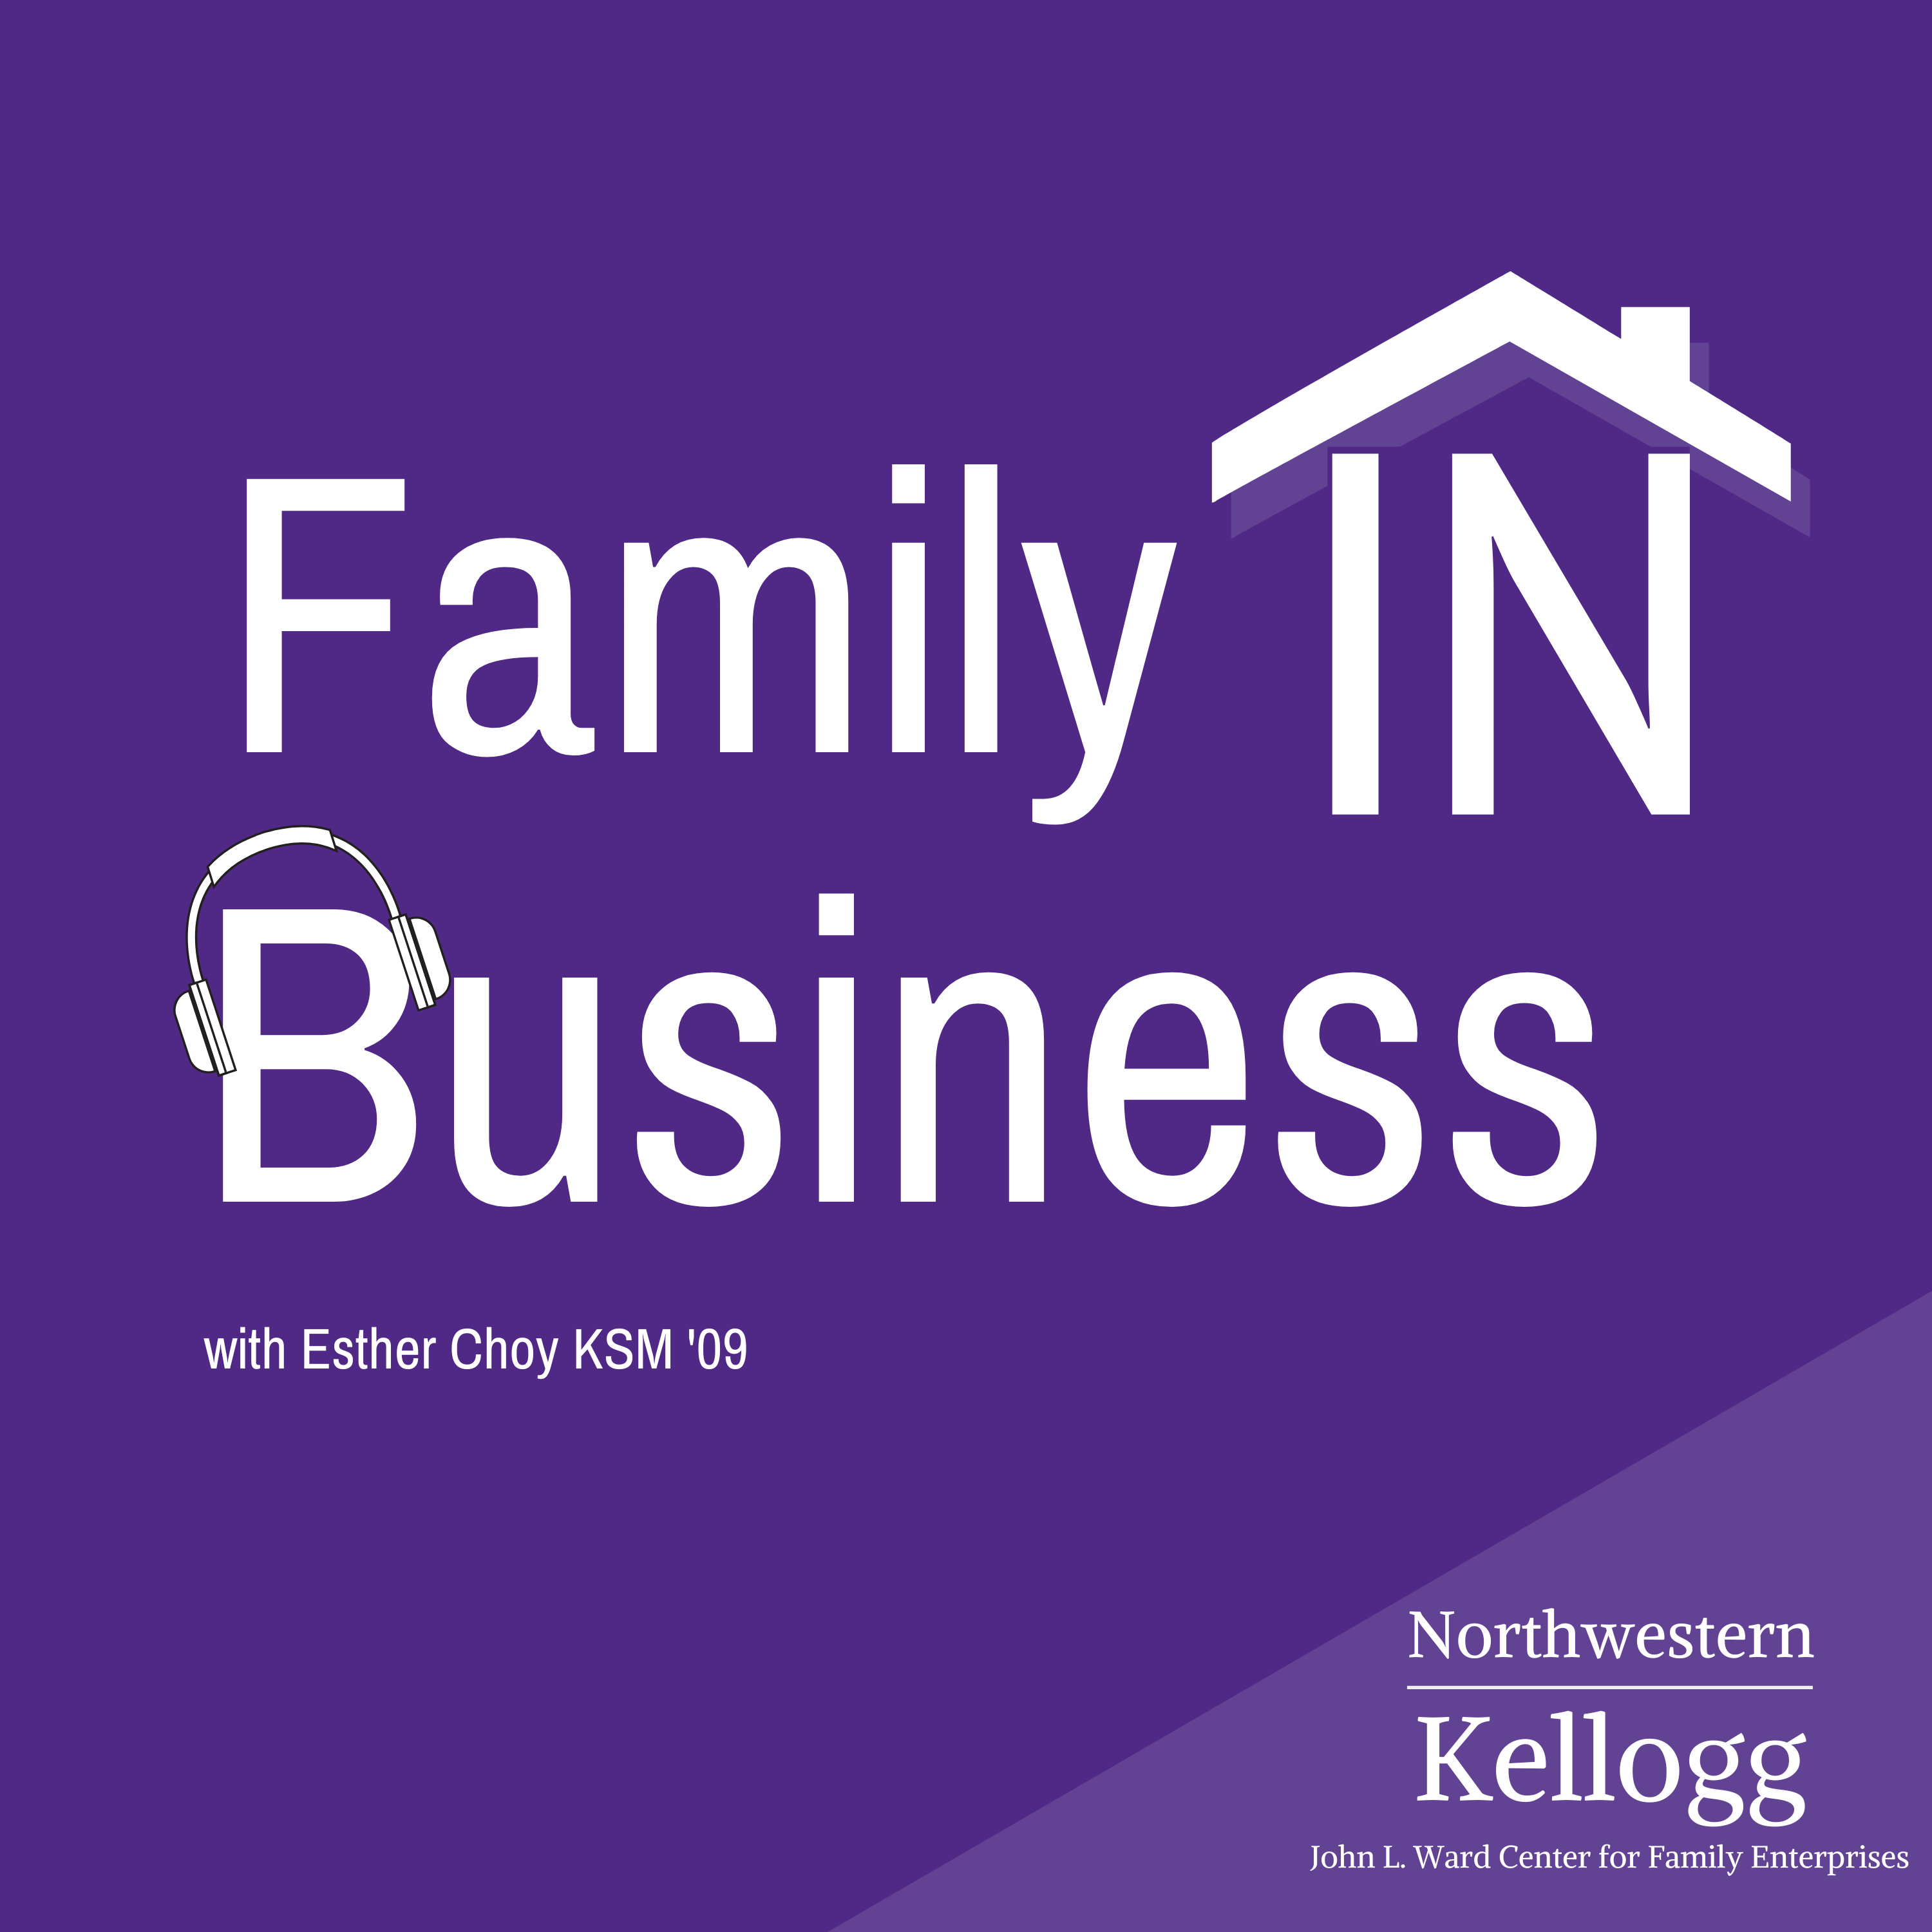 Introducing: Family IN Business